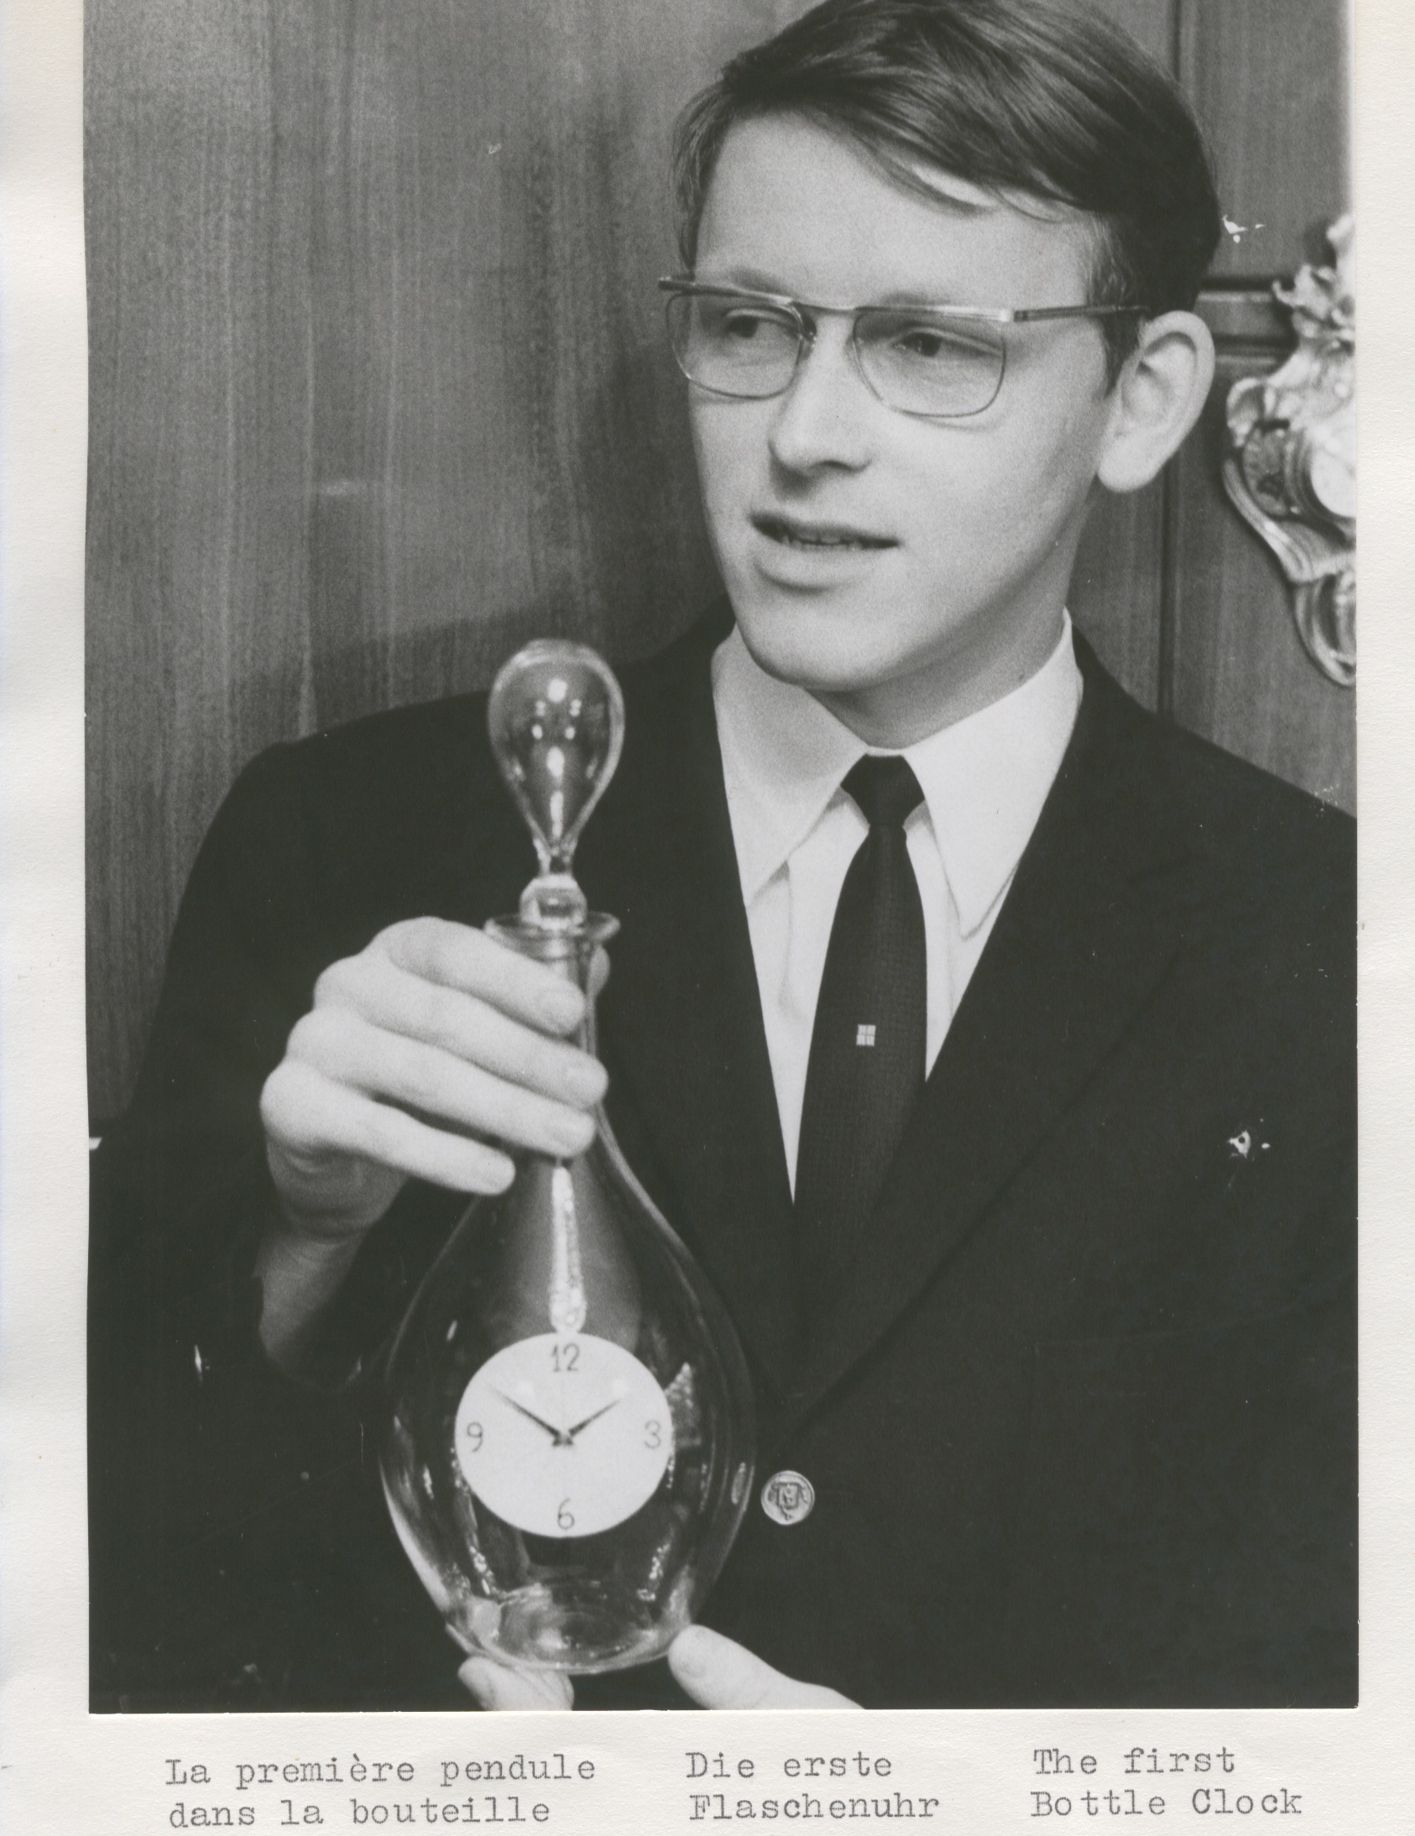 Anderson proudly displays his bottle clock in 1970